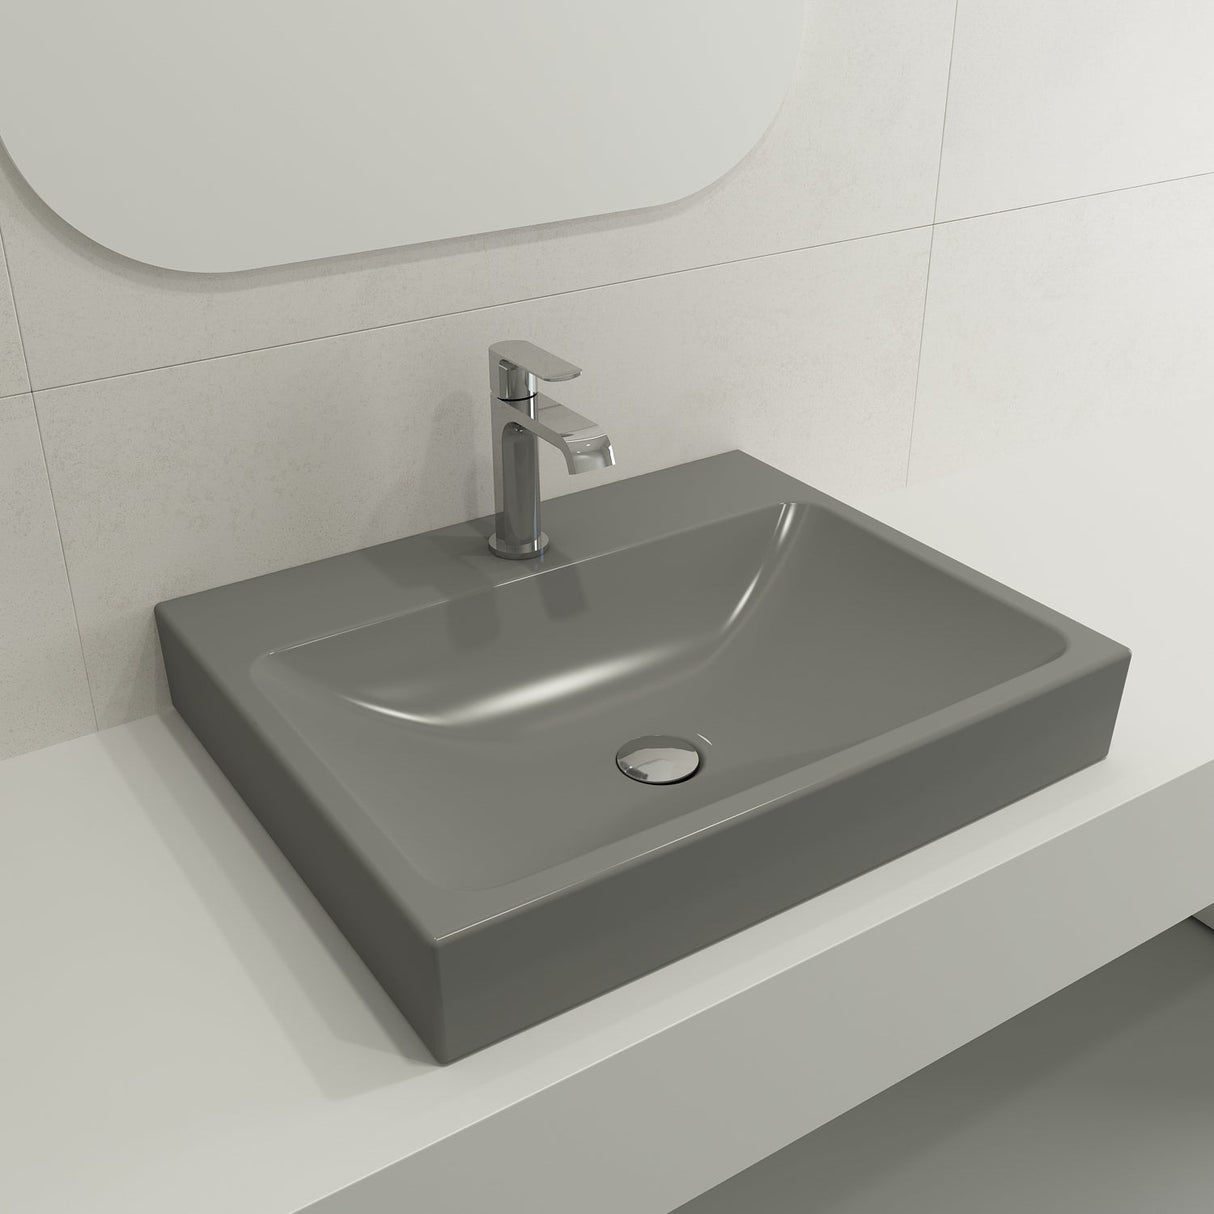 BOCCHI 1077-006-0126 Scala Arch Wall-Mounted Sink Fireclay 23.75 in. 1-Hole in Matte Gray